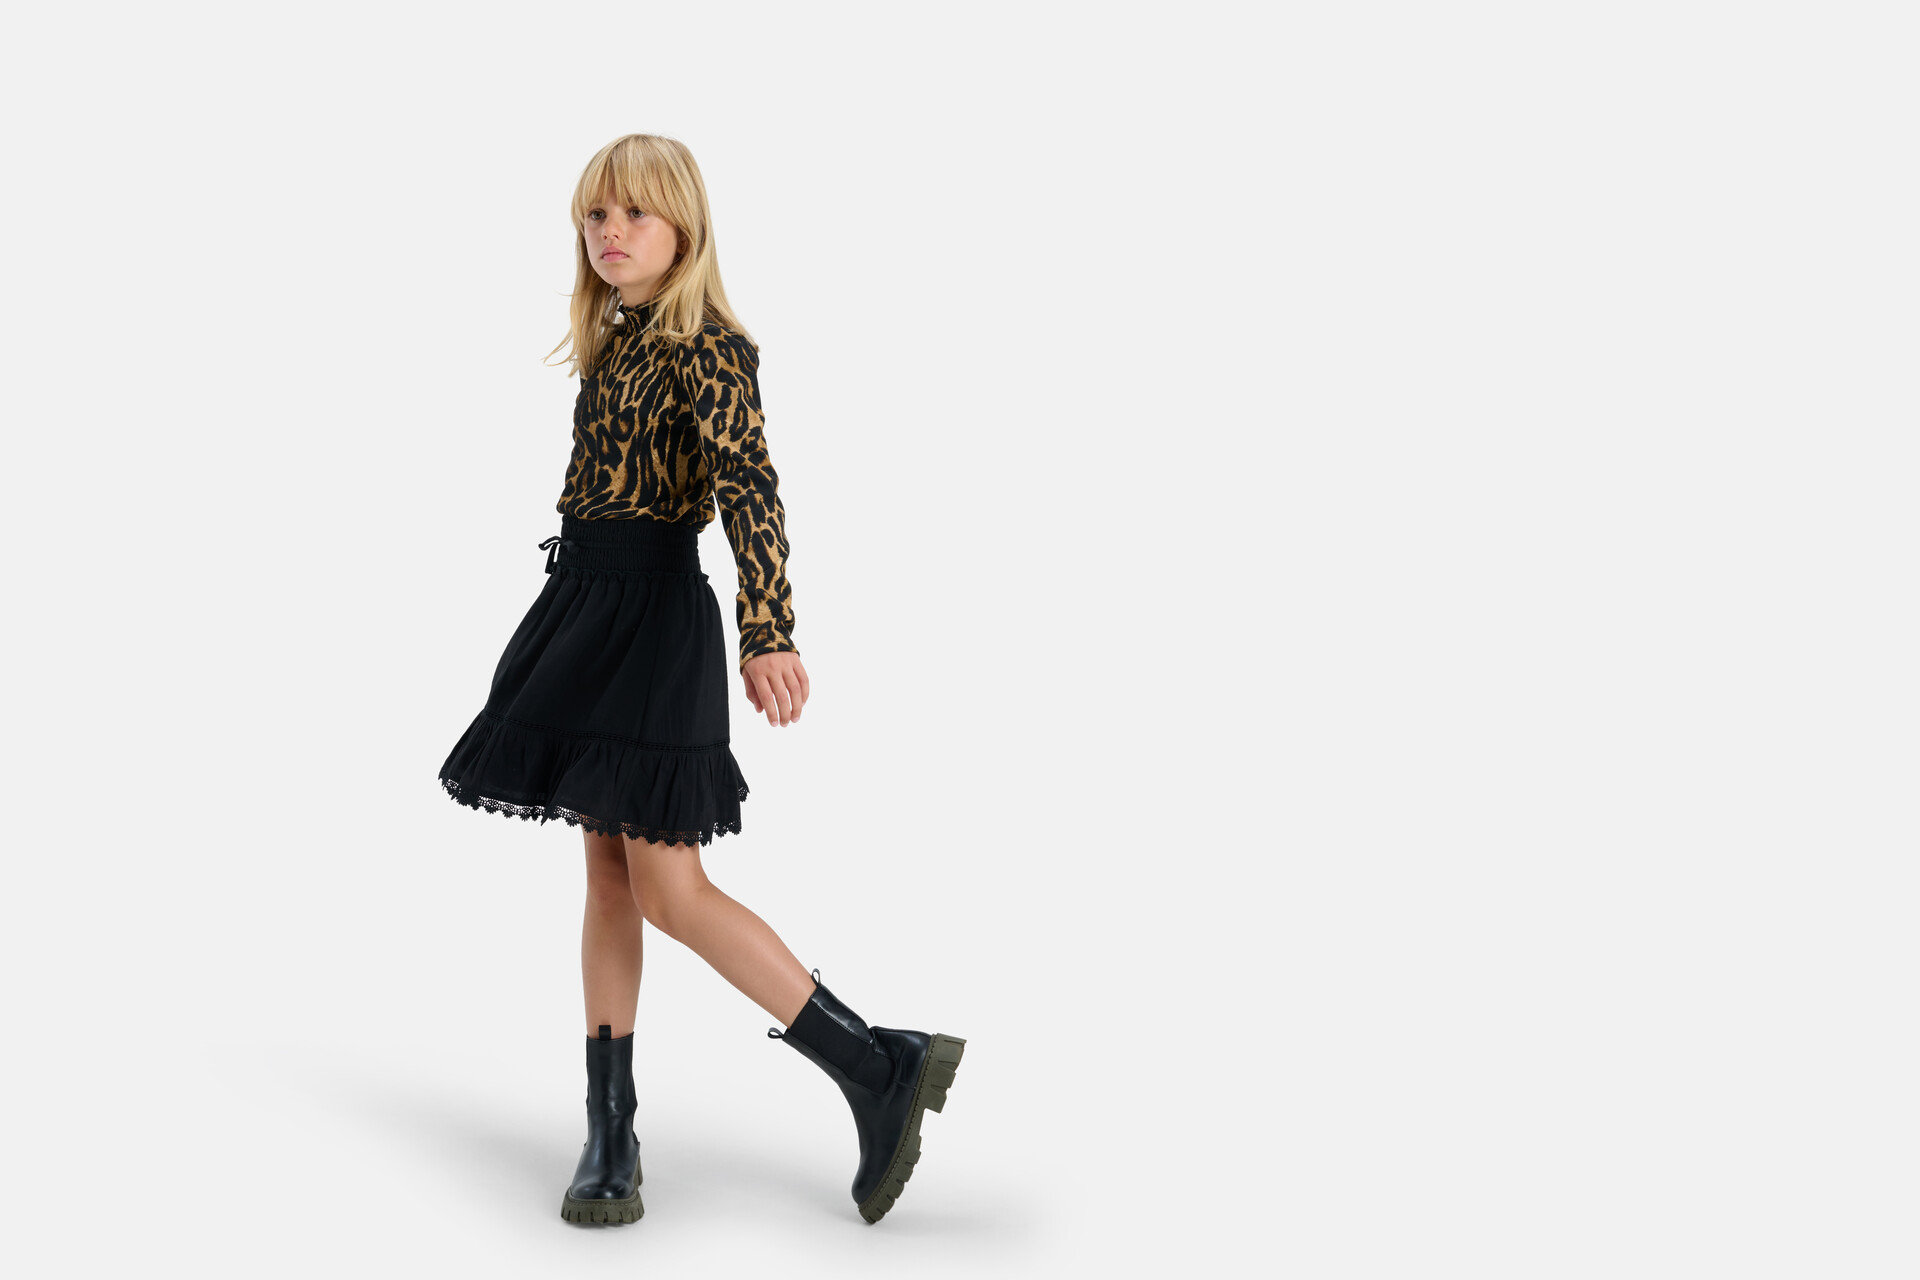 Top mit Leopardenmuster SHOEBY GIRLS